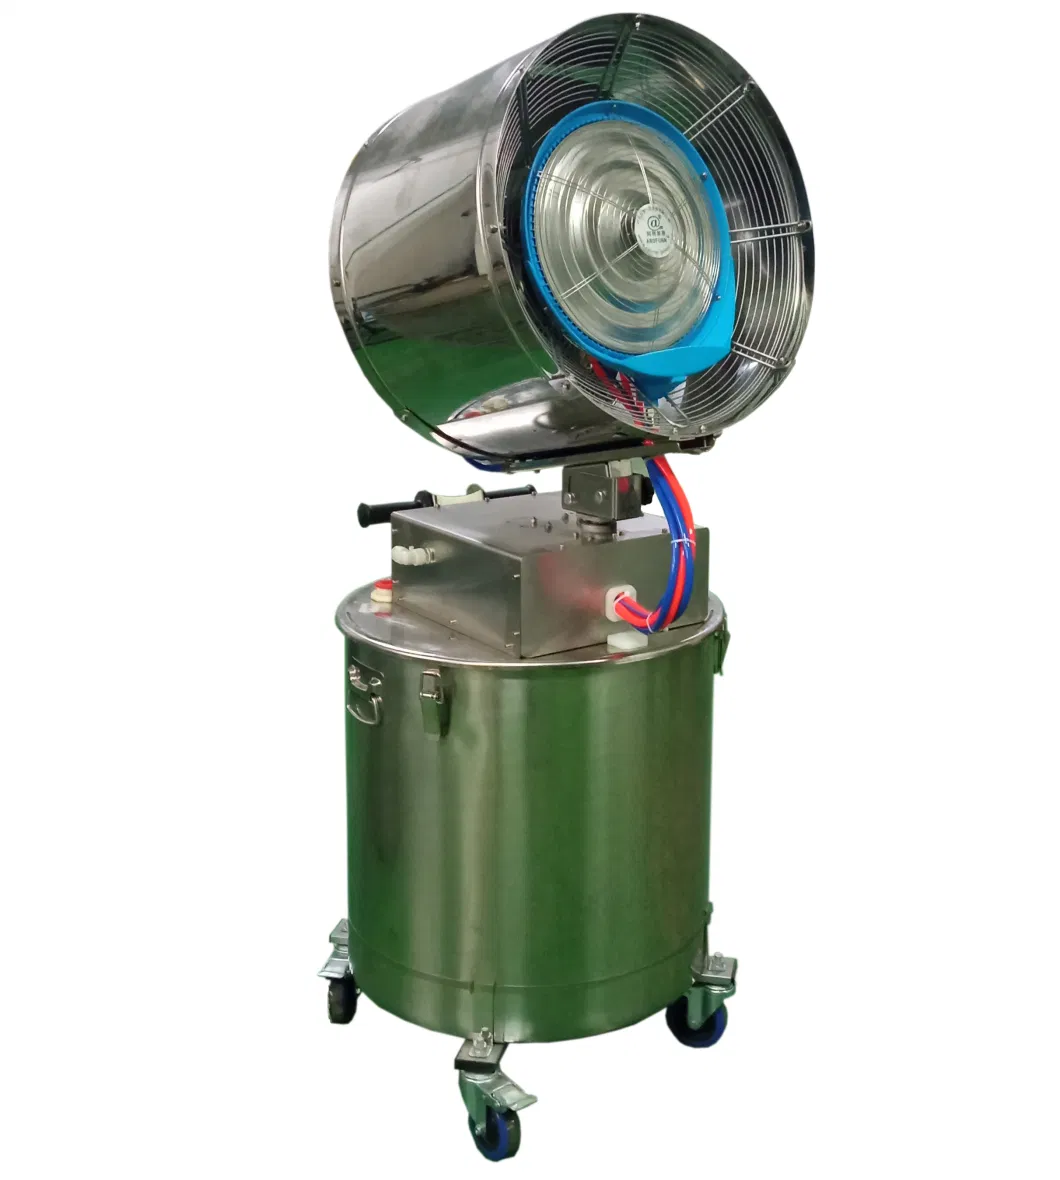 Pneumatic Explosion-Proof Mist-Spraying Cooling Fan for Chemical Industry